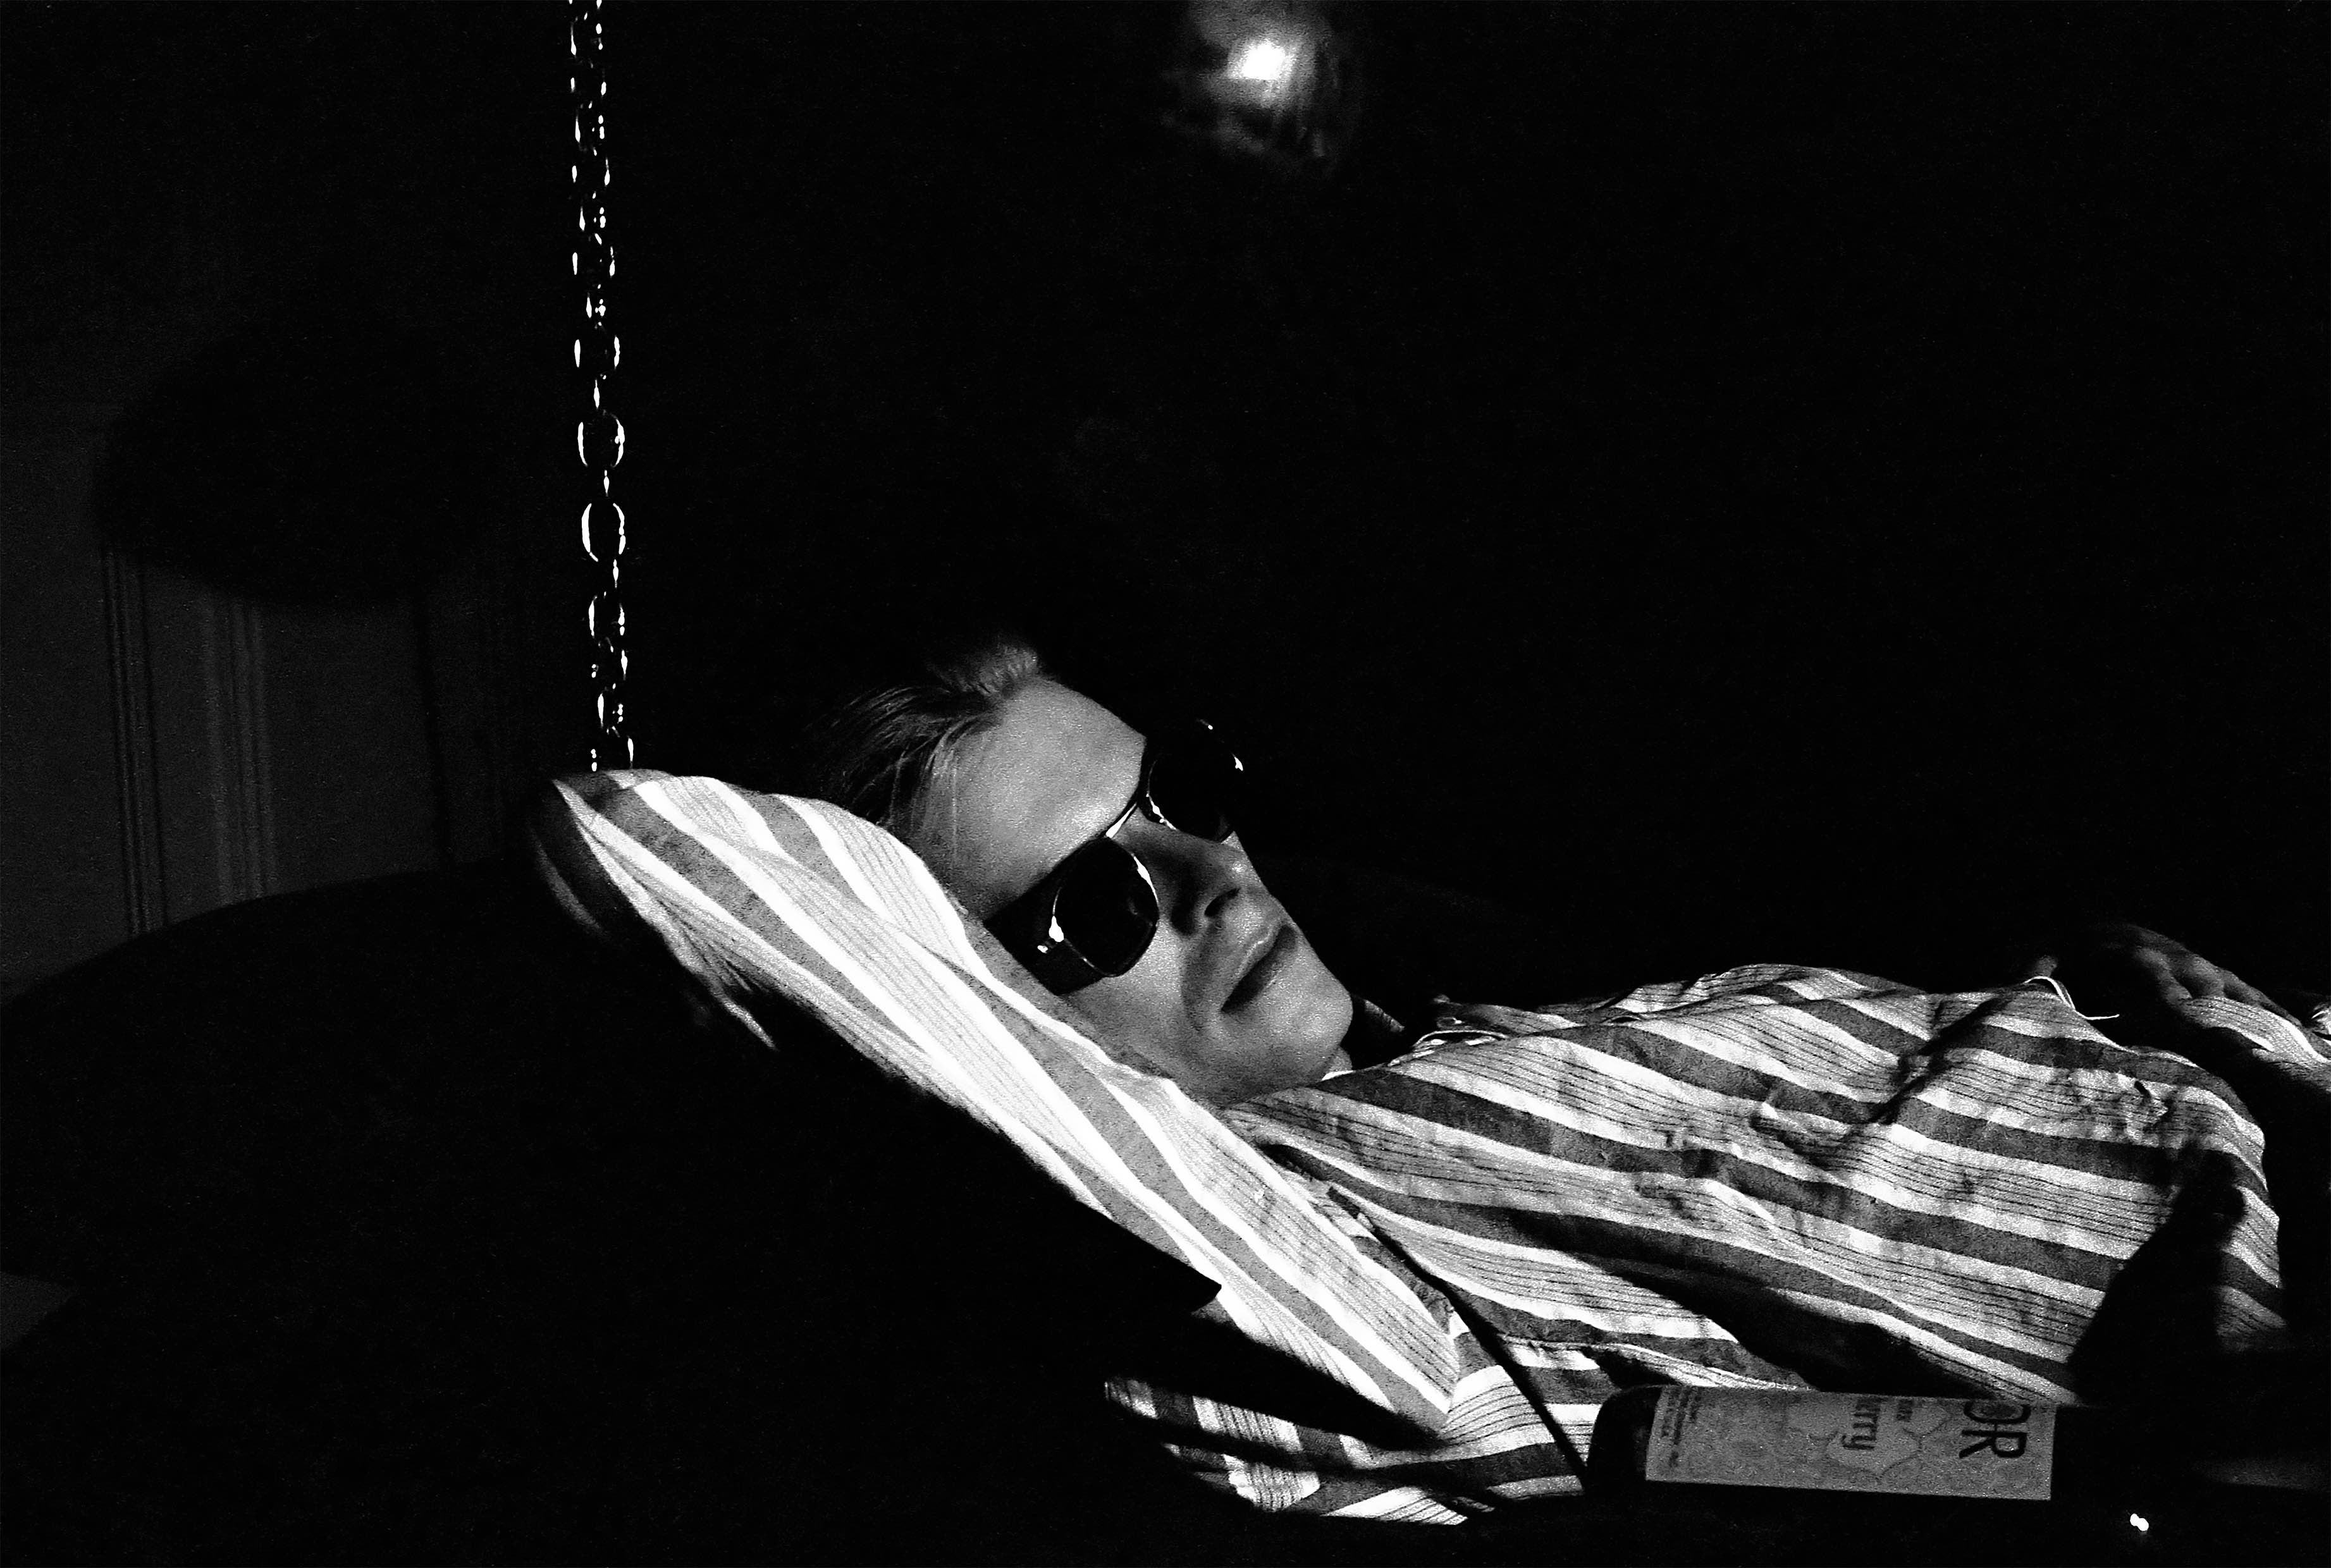 David Bowie reclining with sunglasses in 1975 during the filming of ‘The Man Who Fell to Earth’